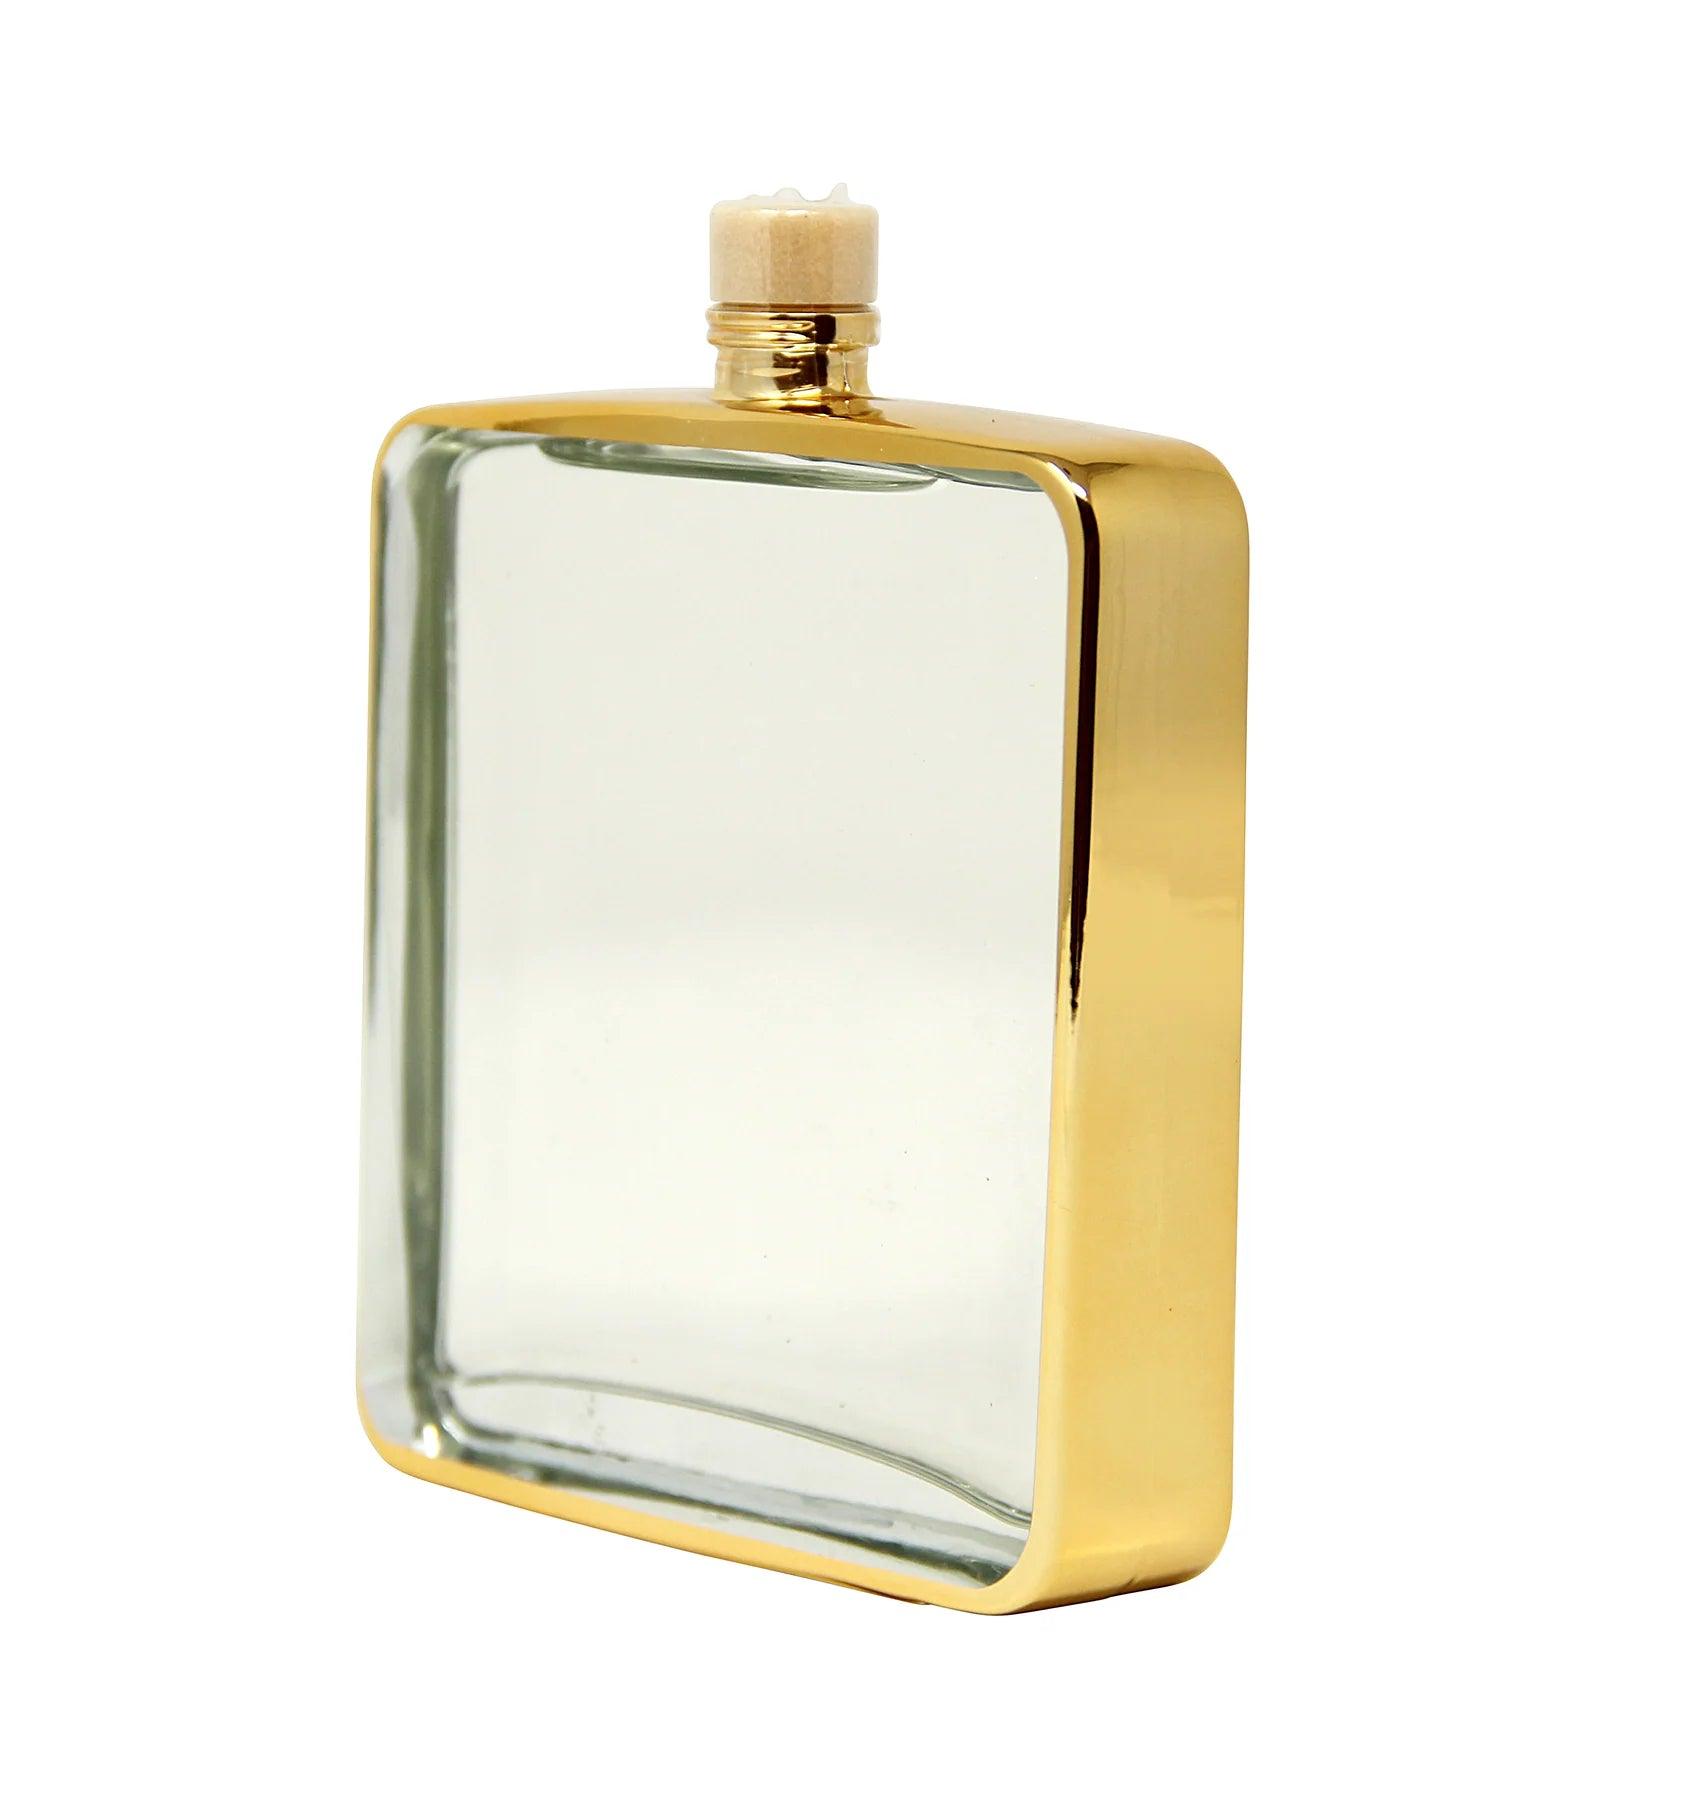 Gold Framed Square Shaped Diffuser, "Lily Of The Valley" Scent - Elegant Linen